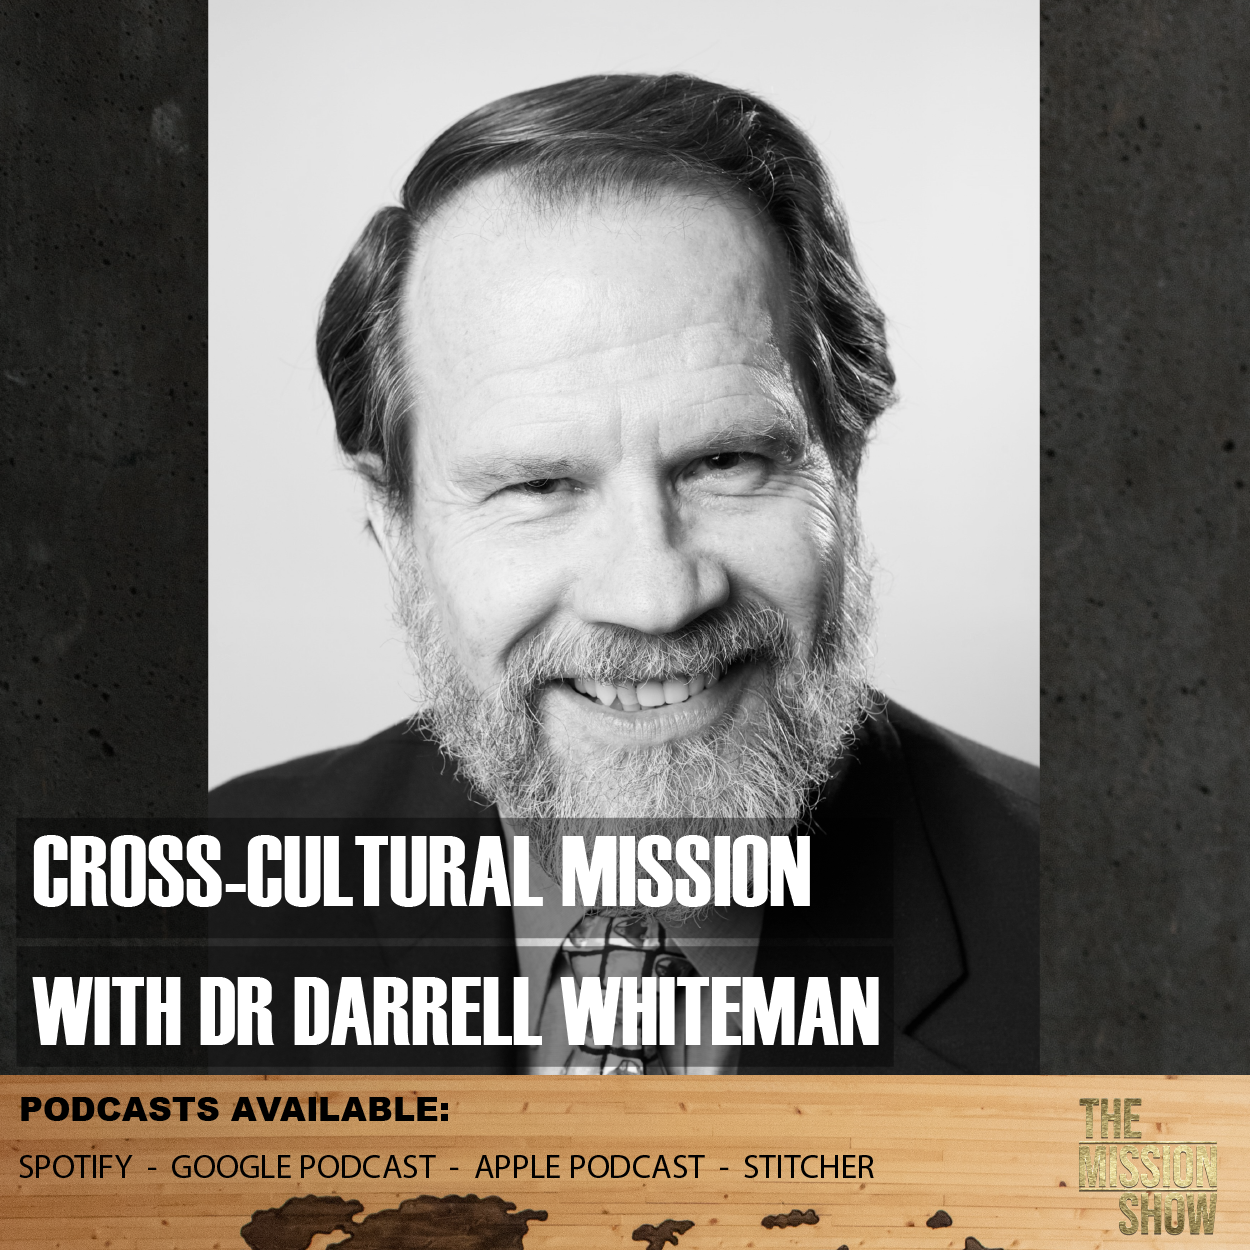 Interview with Dr. Darrell Whiteman